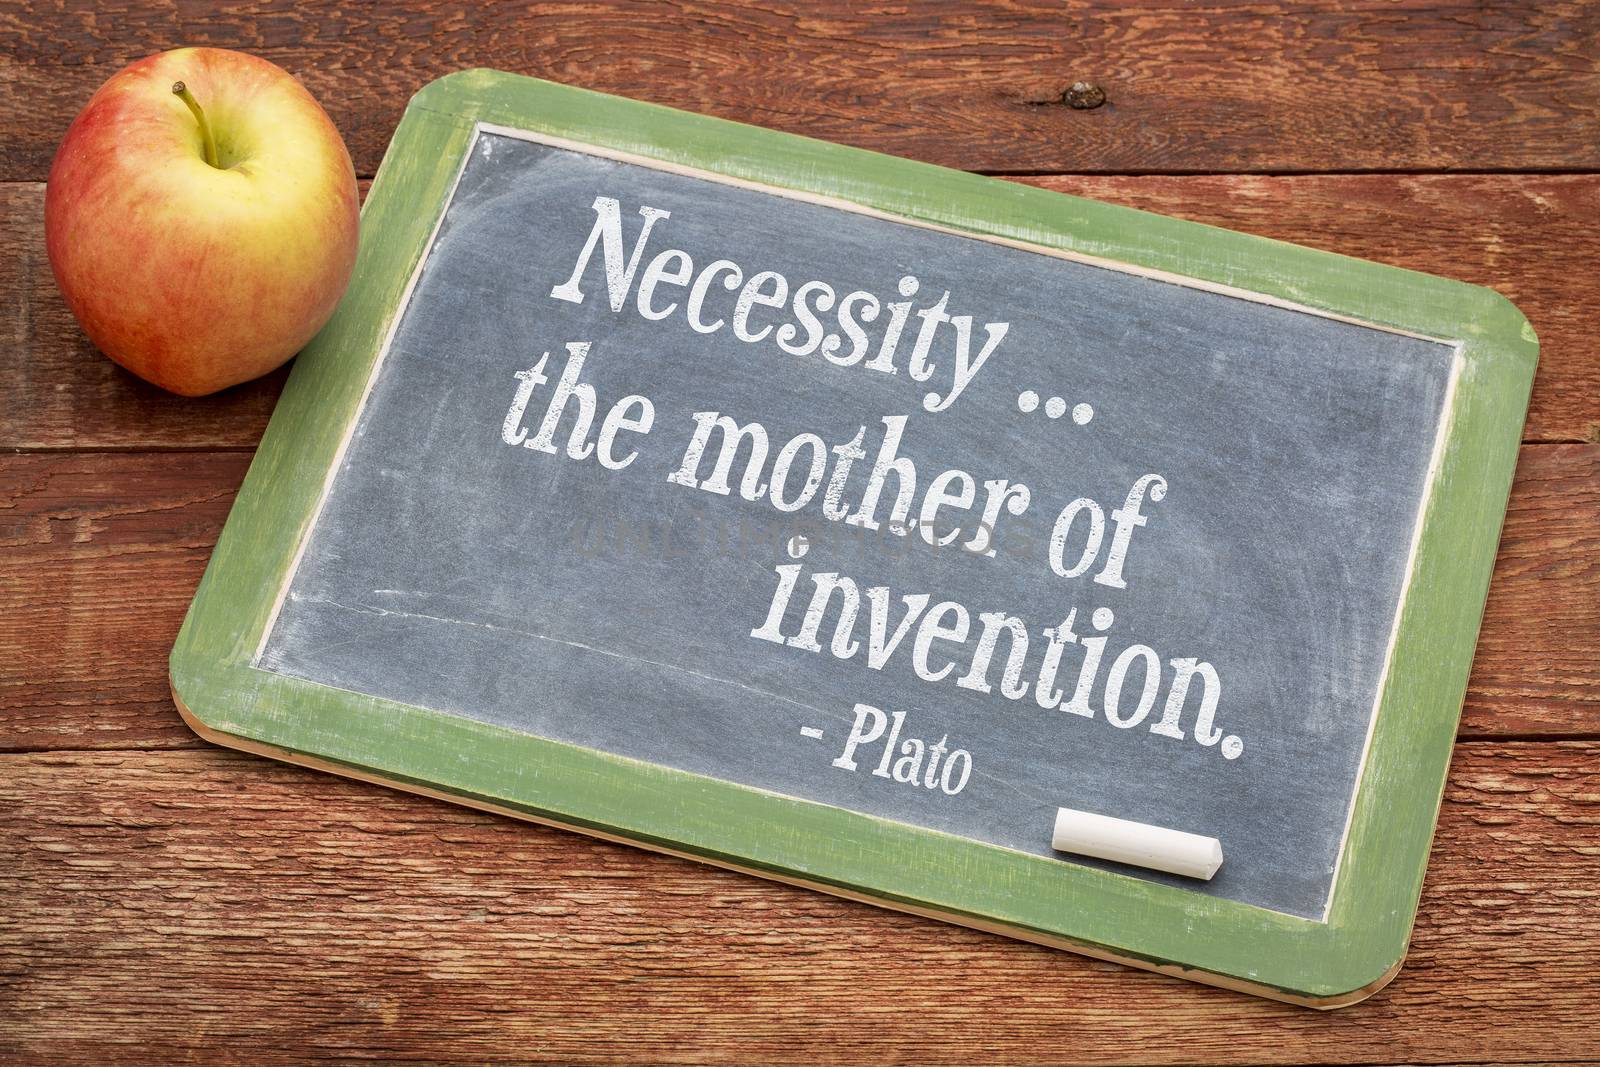 Necessity - the mother of invention by PixelsAway